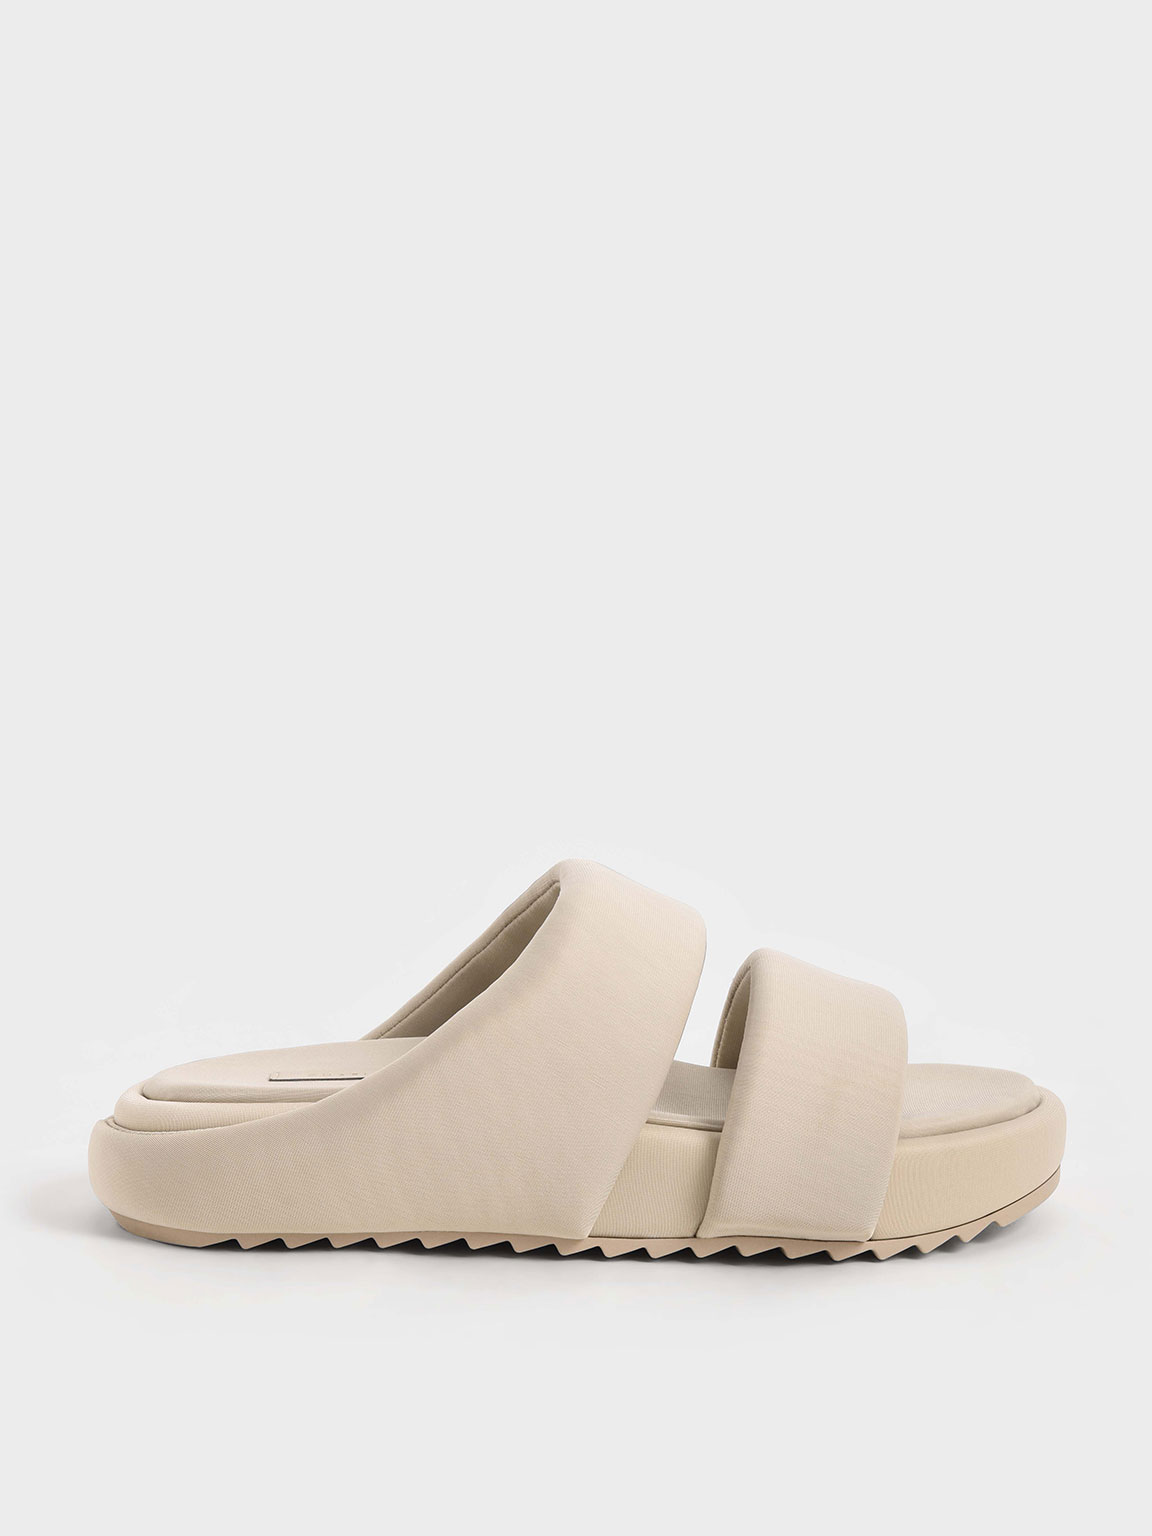 Sand Recycled Polyester Padded Slide Sandals - CHARLES & KEITH ID